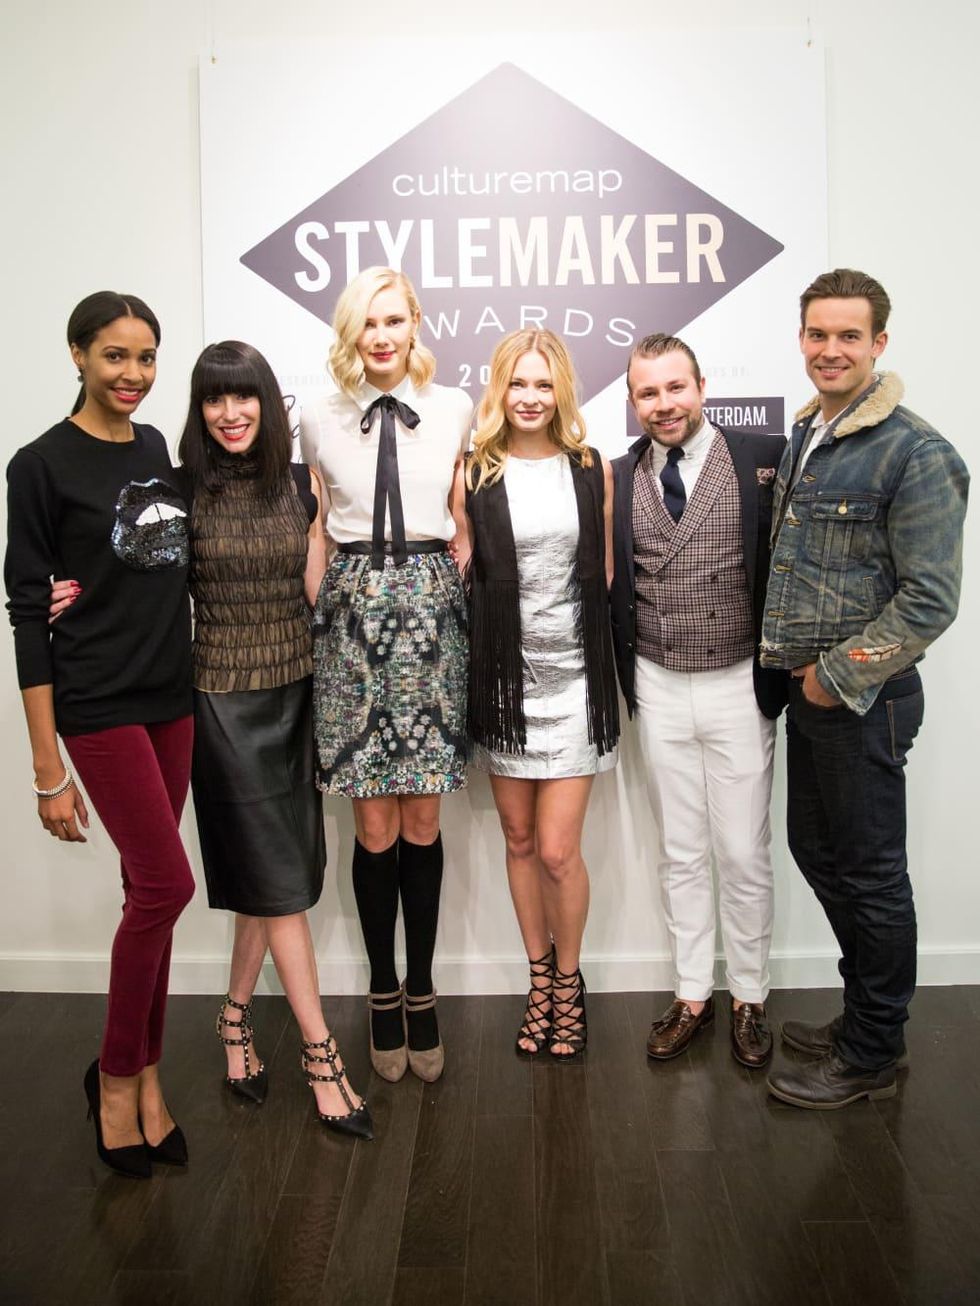 The two Stylemaker winners